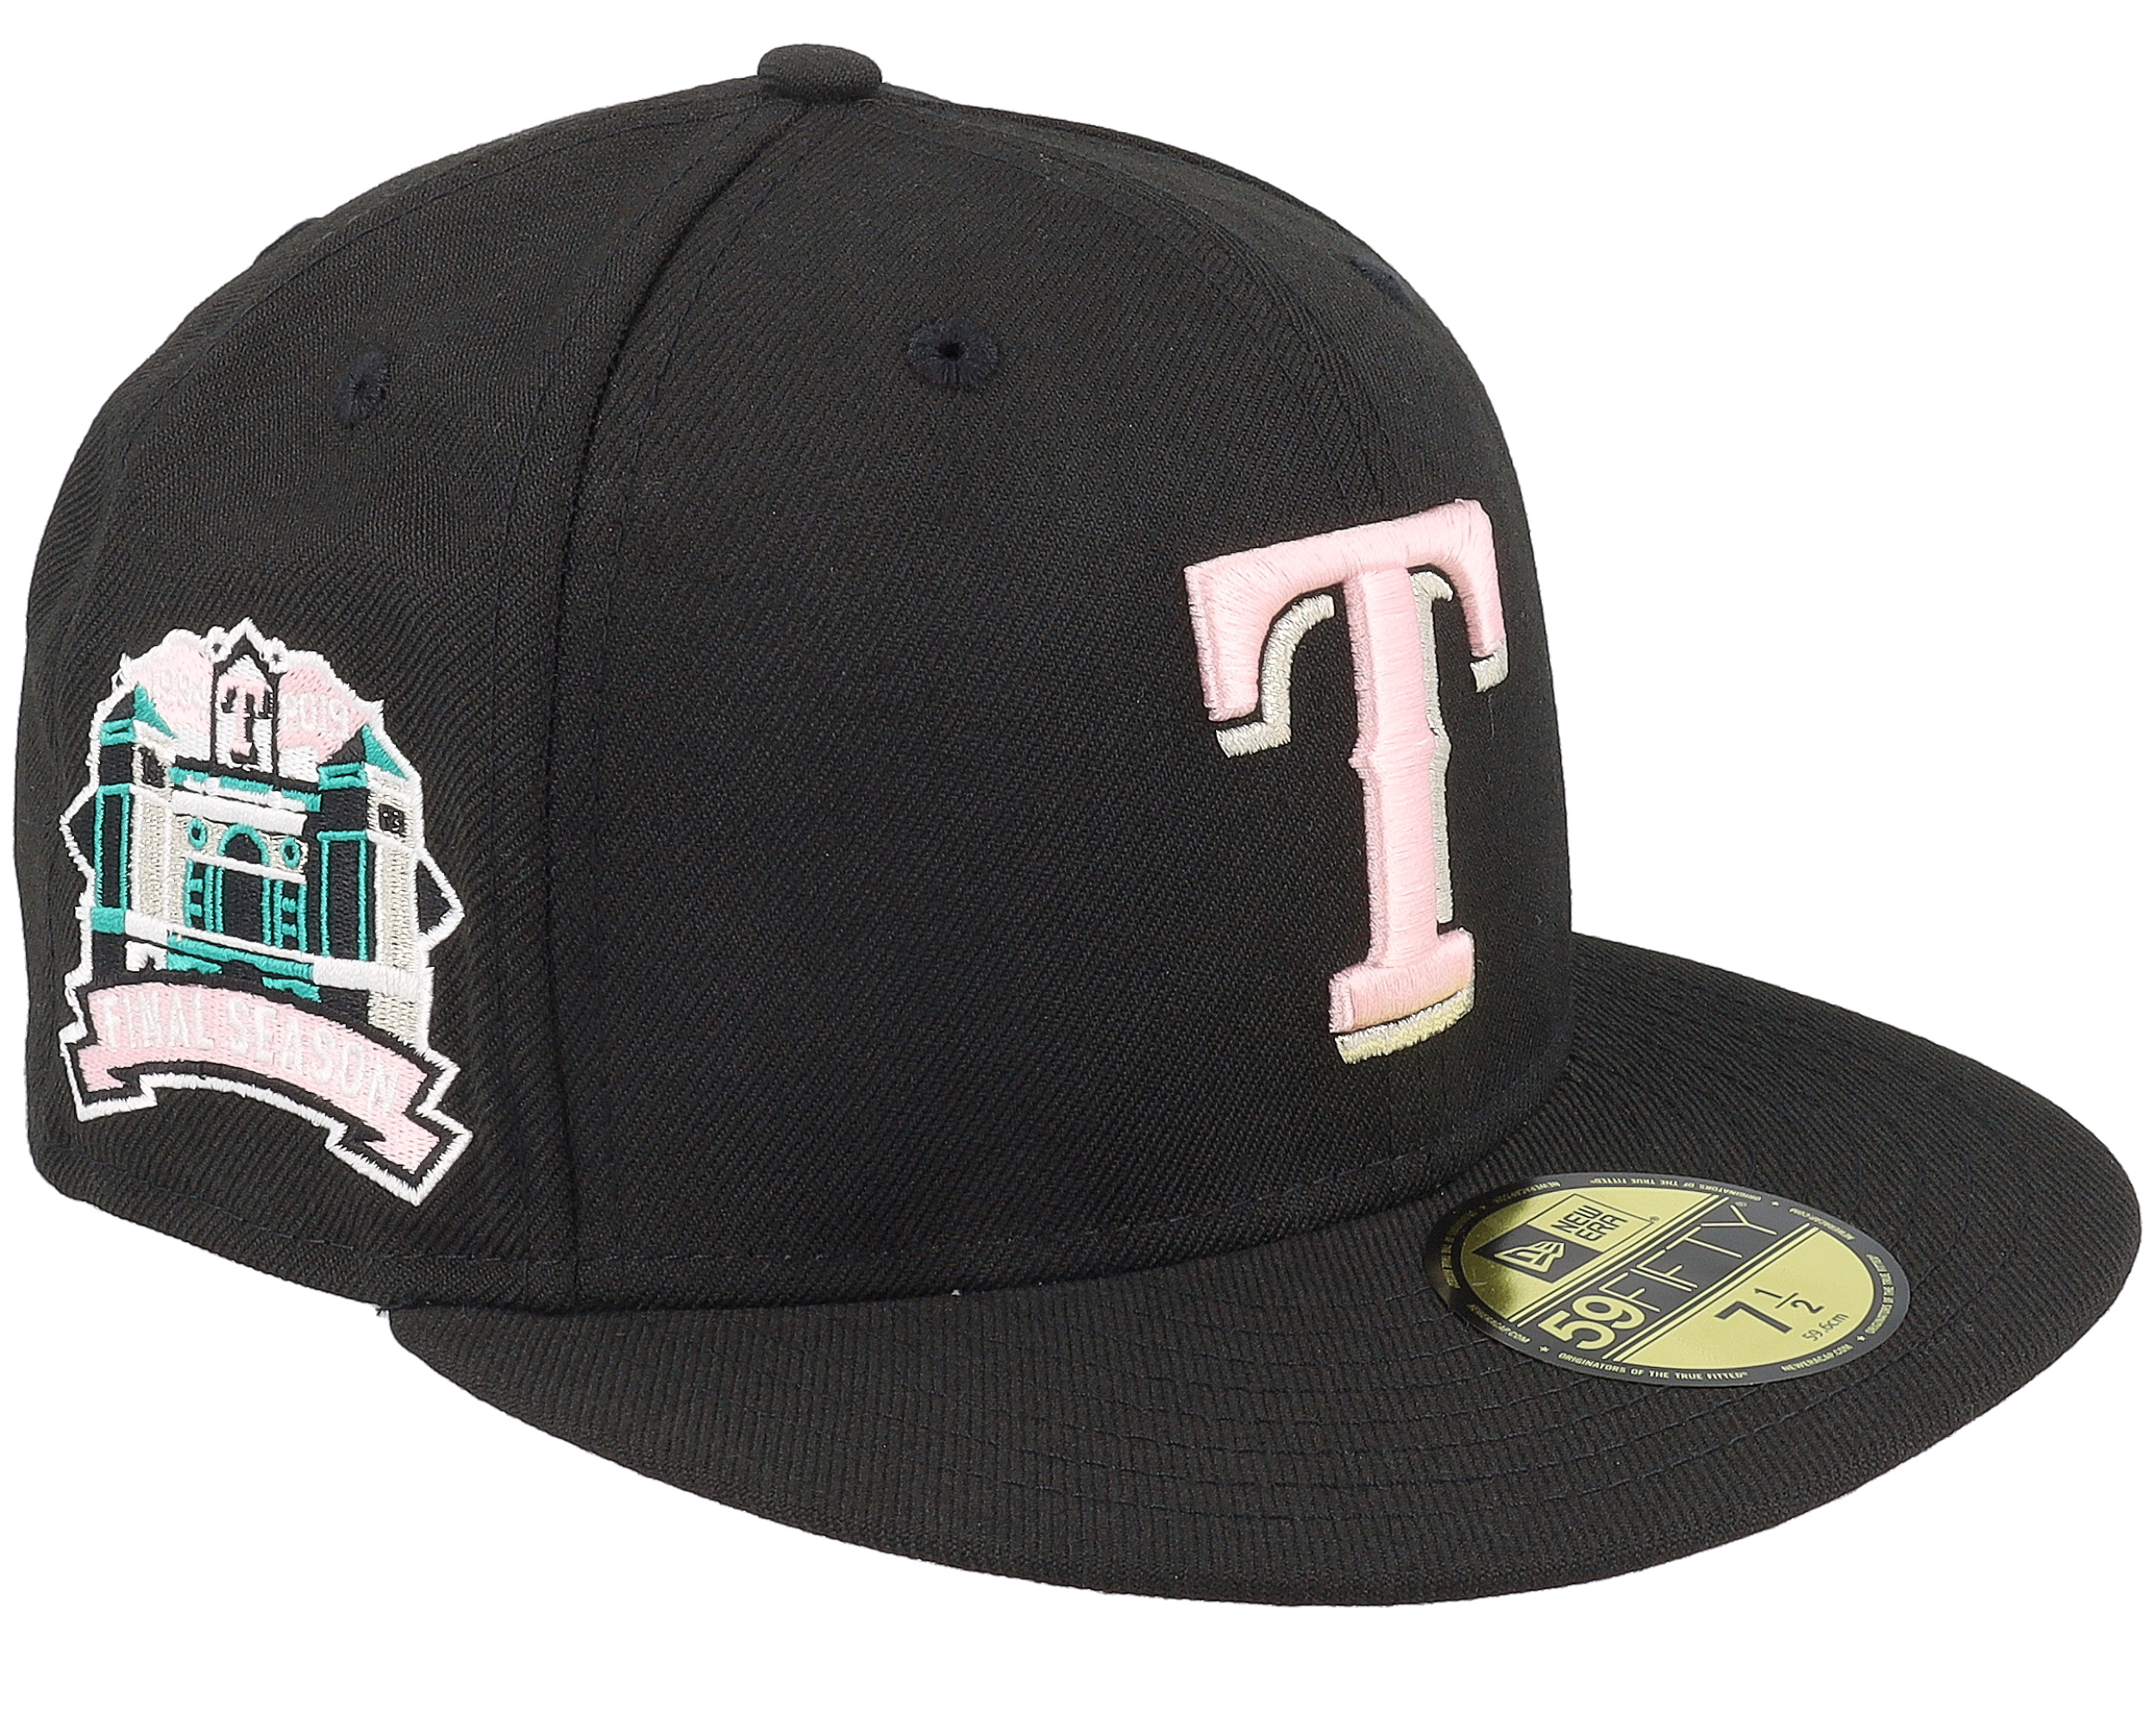 New Era - MLB Black fitted Cap - Texas Rangers Newspaper & Cigar 59FIFTY Black/Pink Fitted @ Fitted World By Hatstore